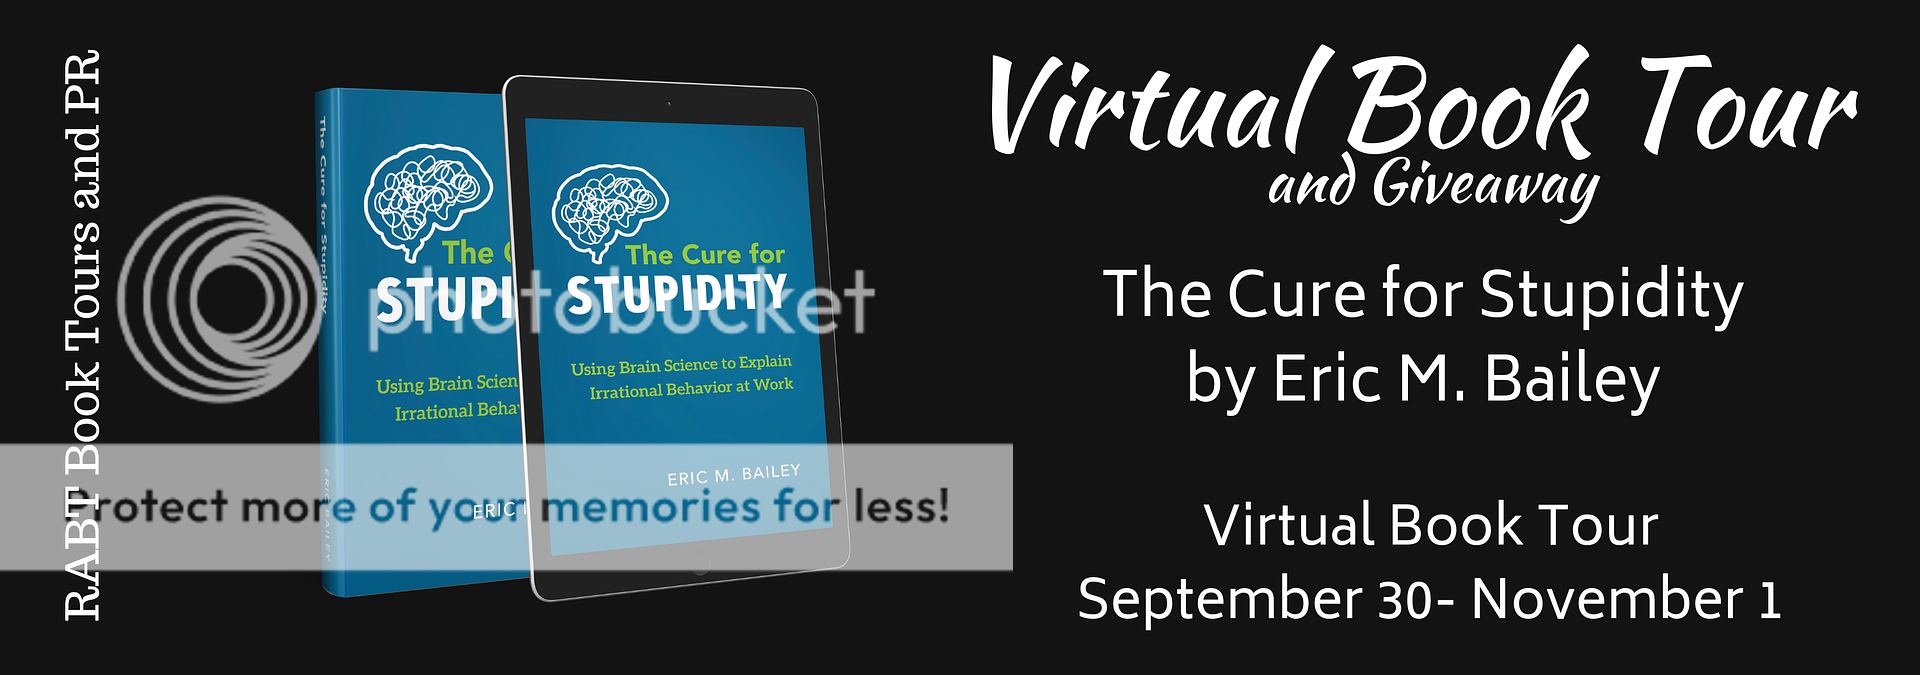 Virtual Book Tour: The Cure for Stupidity by Eric M. Bailey #nonfiction #selfhelp @eric_m_bailey #giveaway @RABTBookTours 